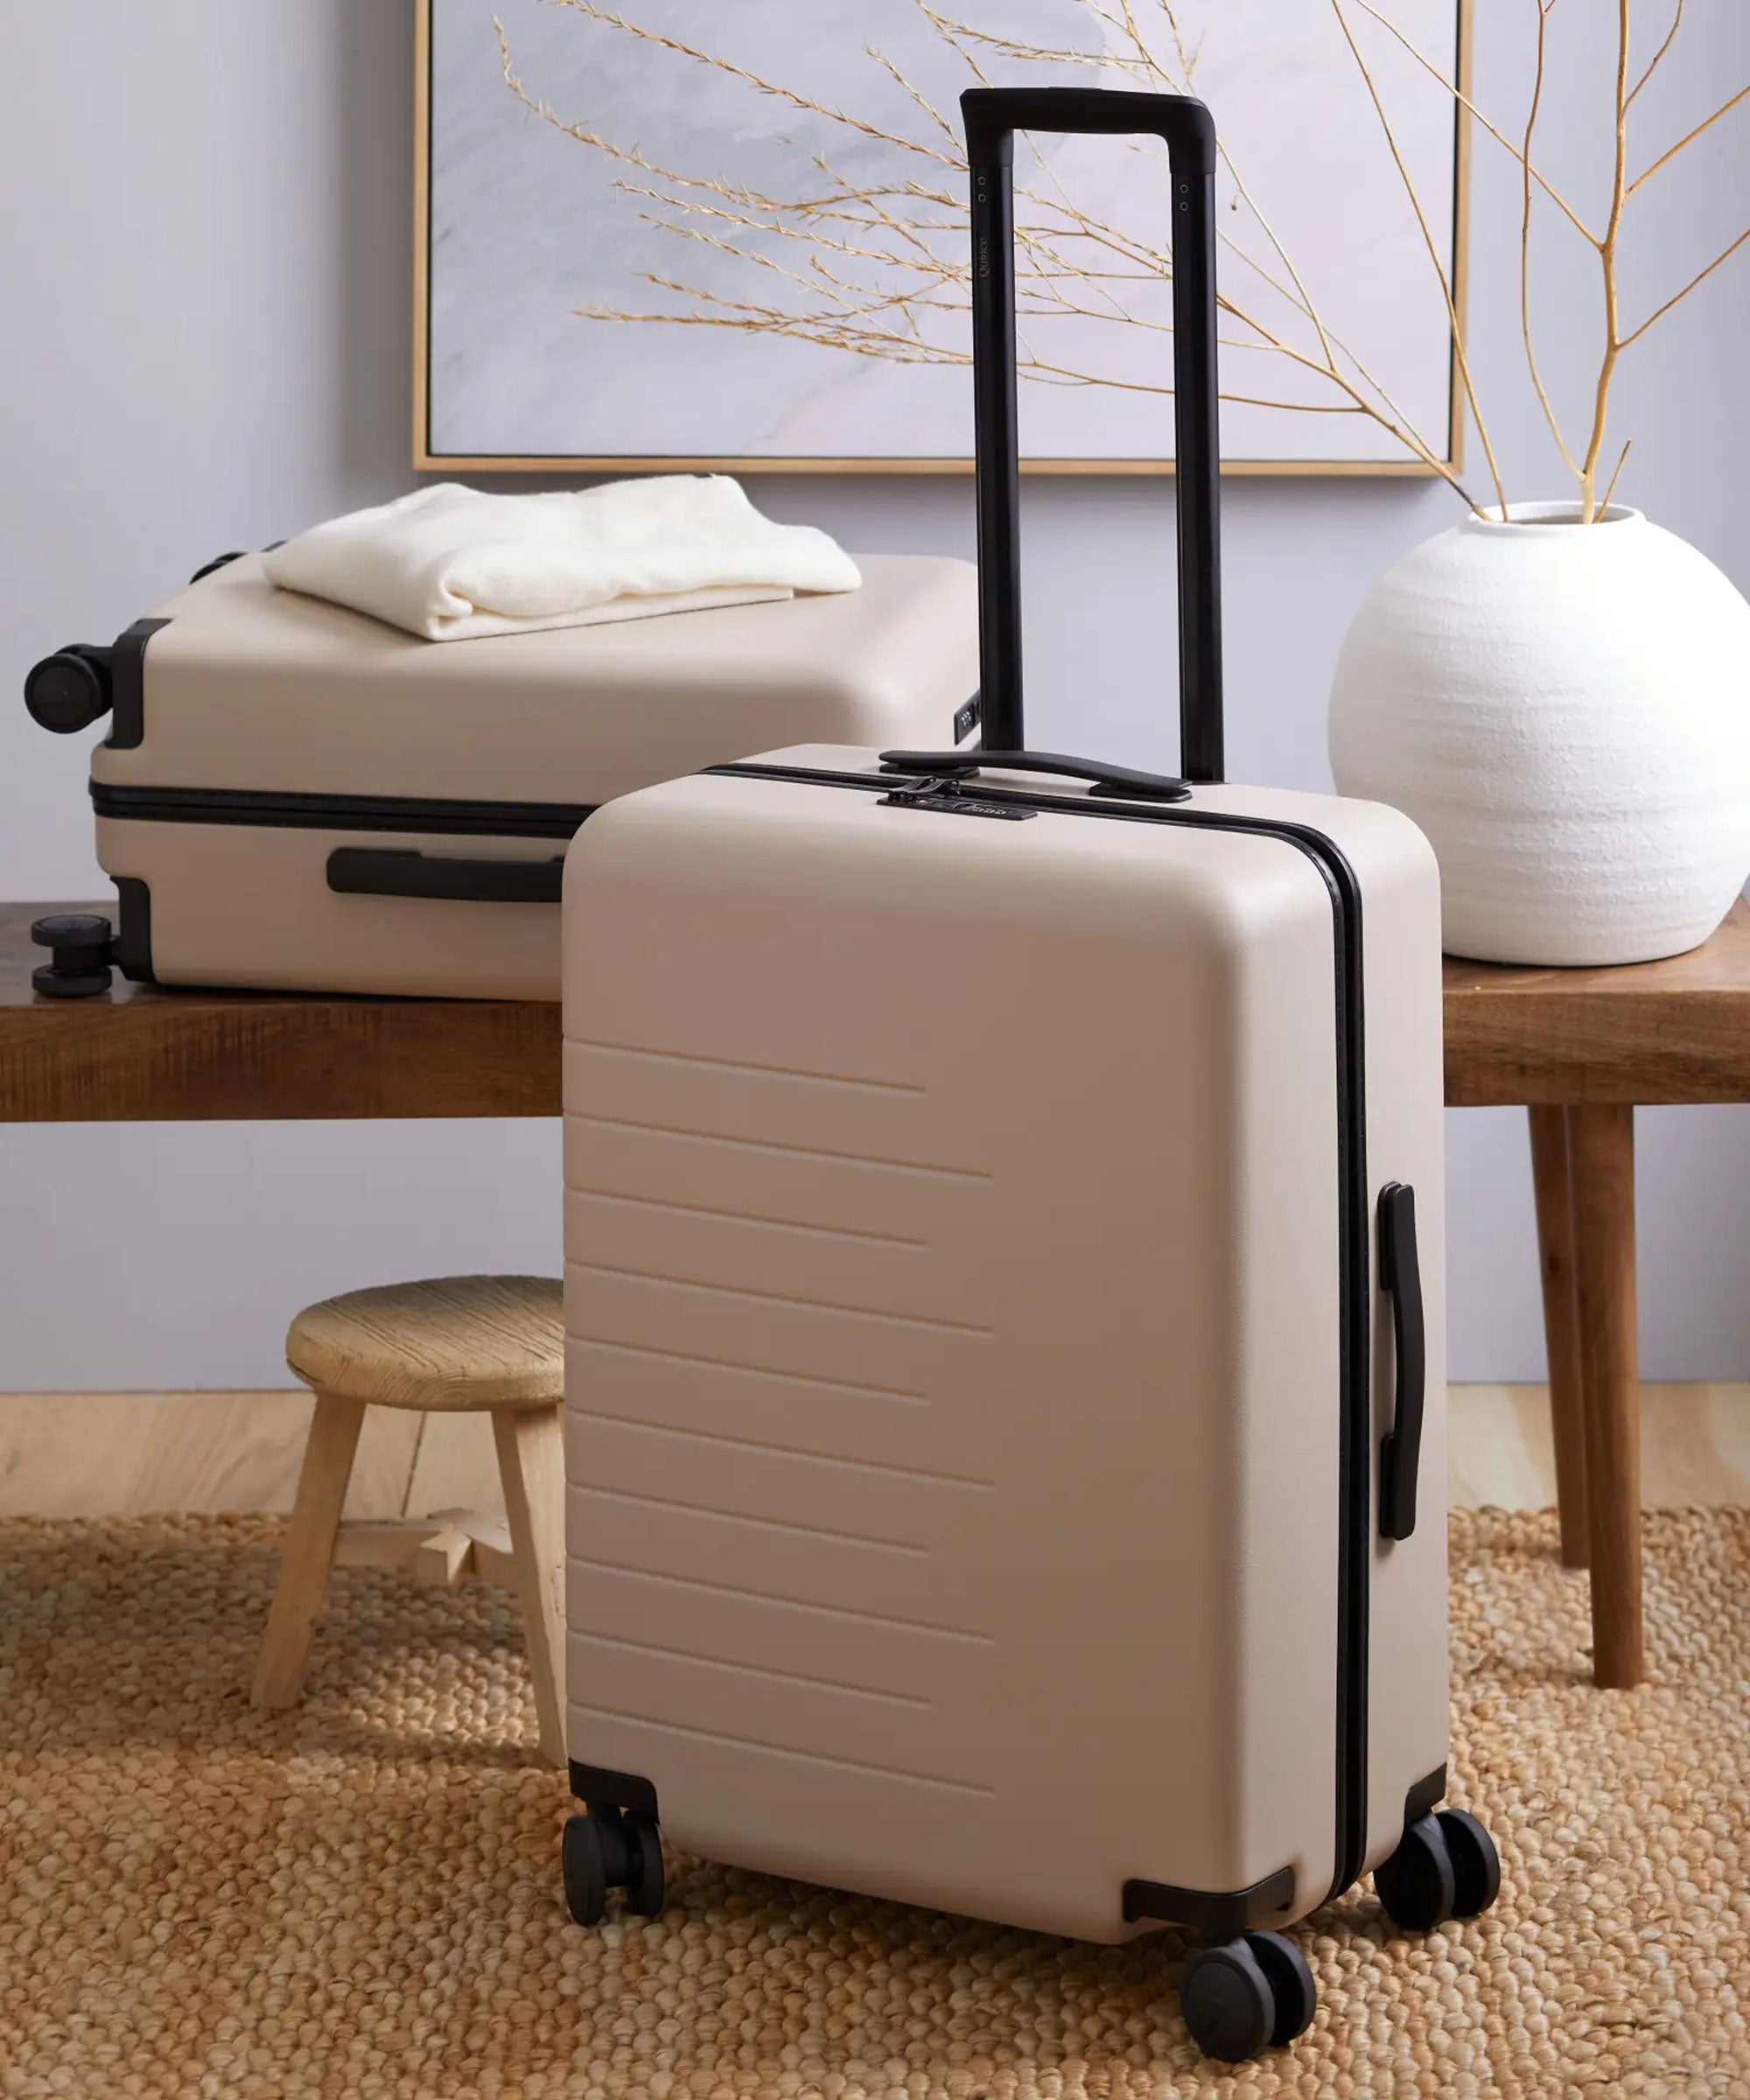 Quince Hard Shell Suitcase Review: Is It Worth The Price?, 50% OFF